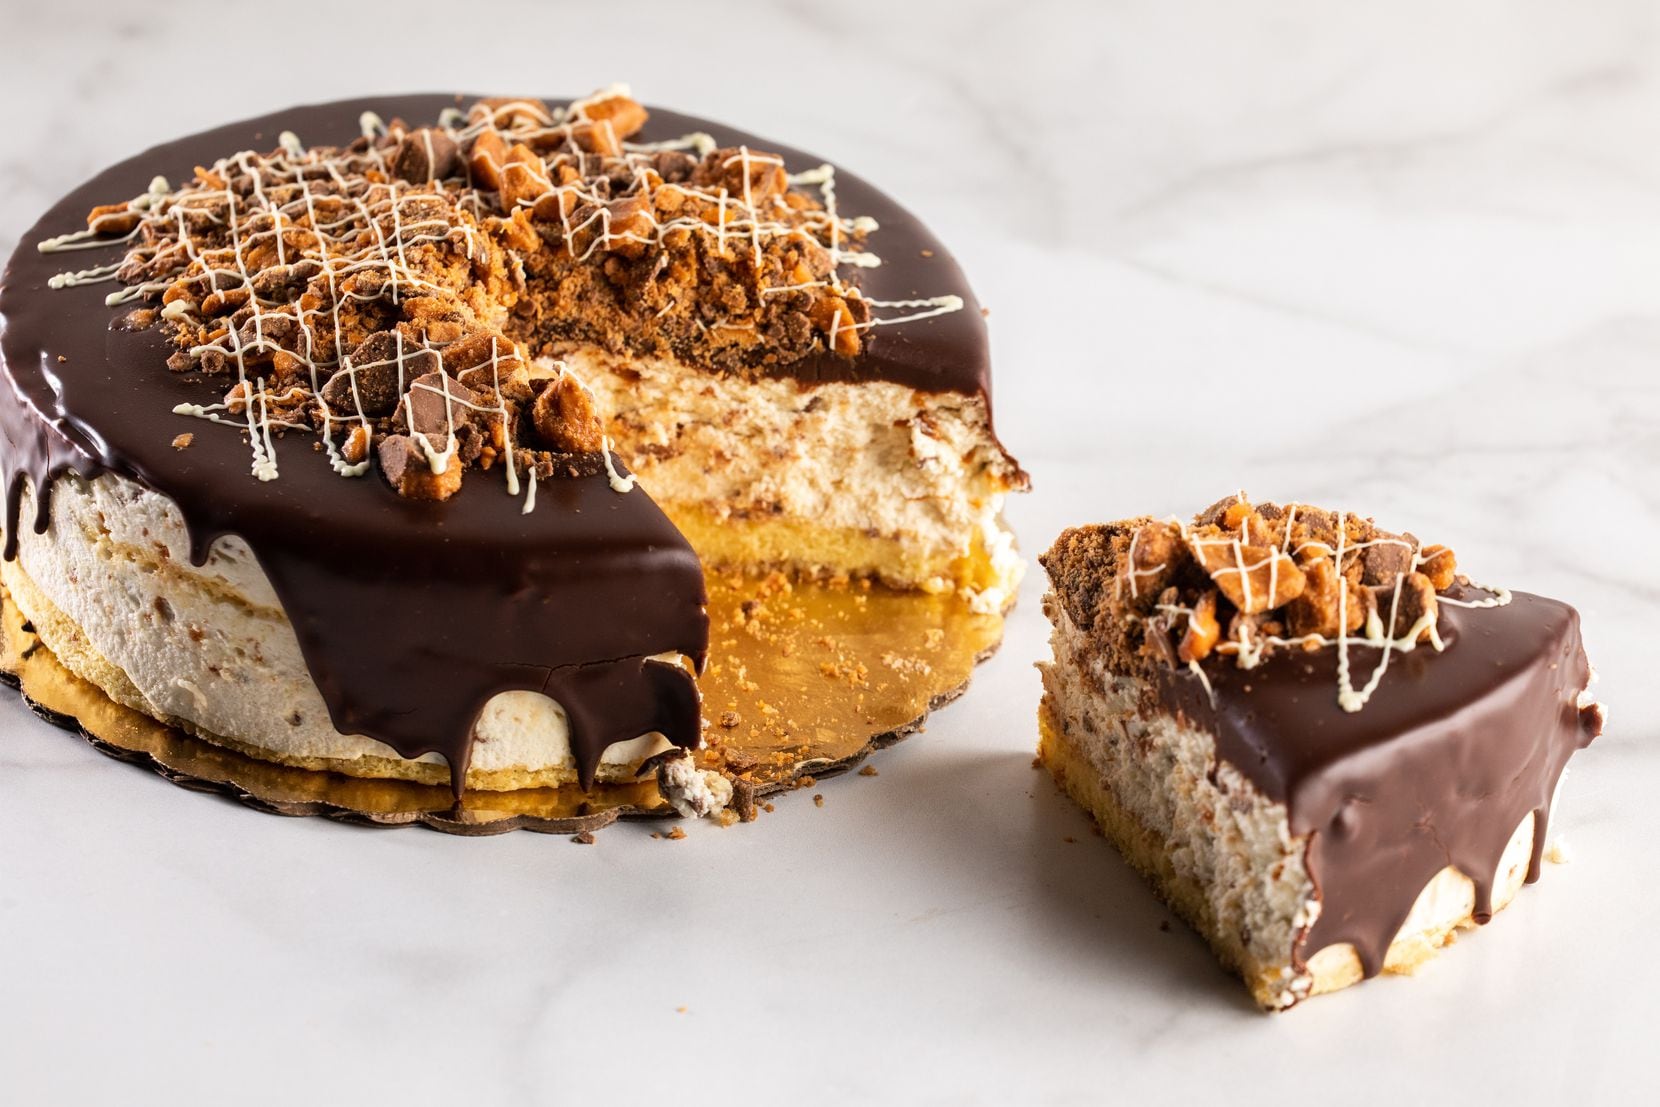 Eatzi's Market and Bakery is offering a Butterfinger white chocolate cake beginning June 19 for Father's Day 2020.